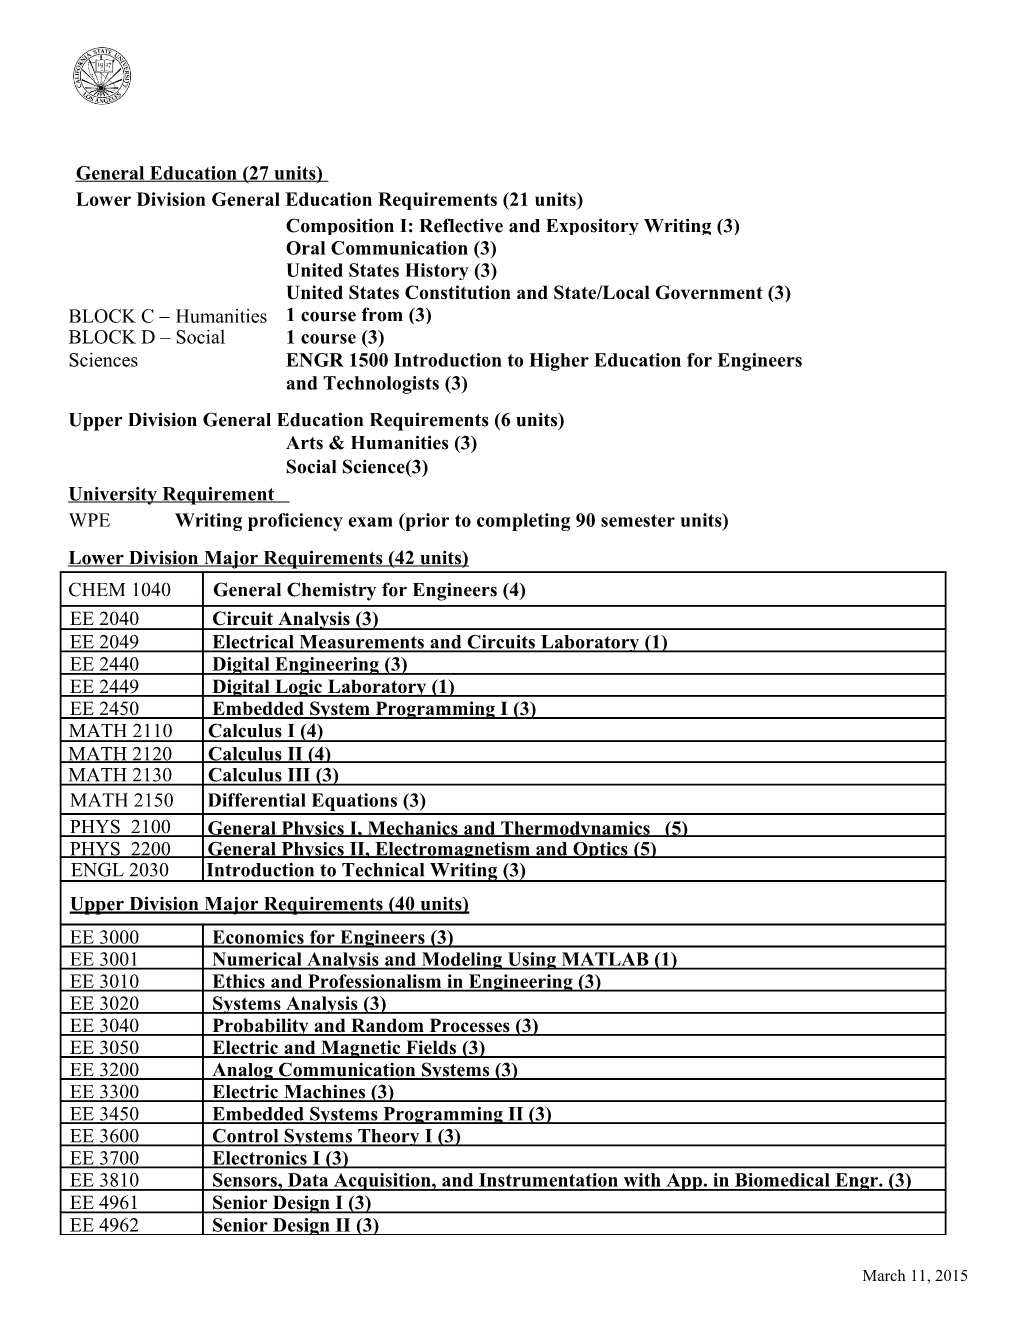 Lower Division General Education Requirements (21 Units)